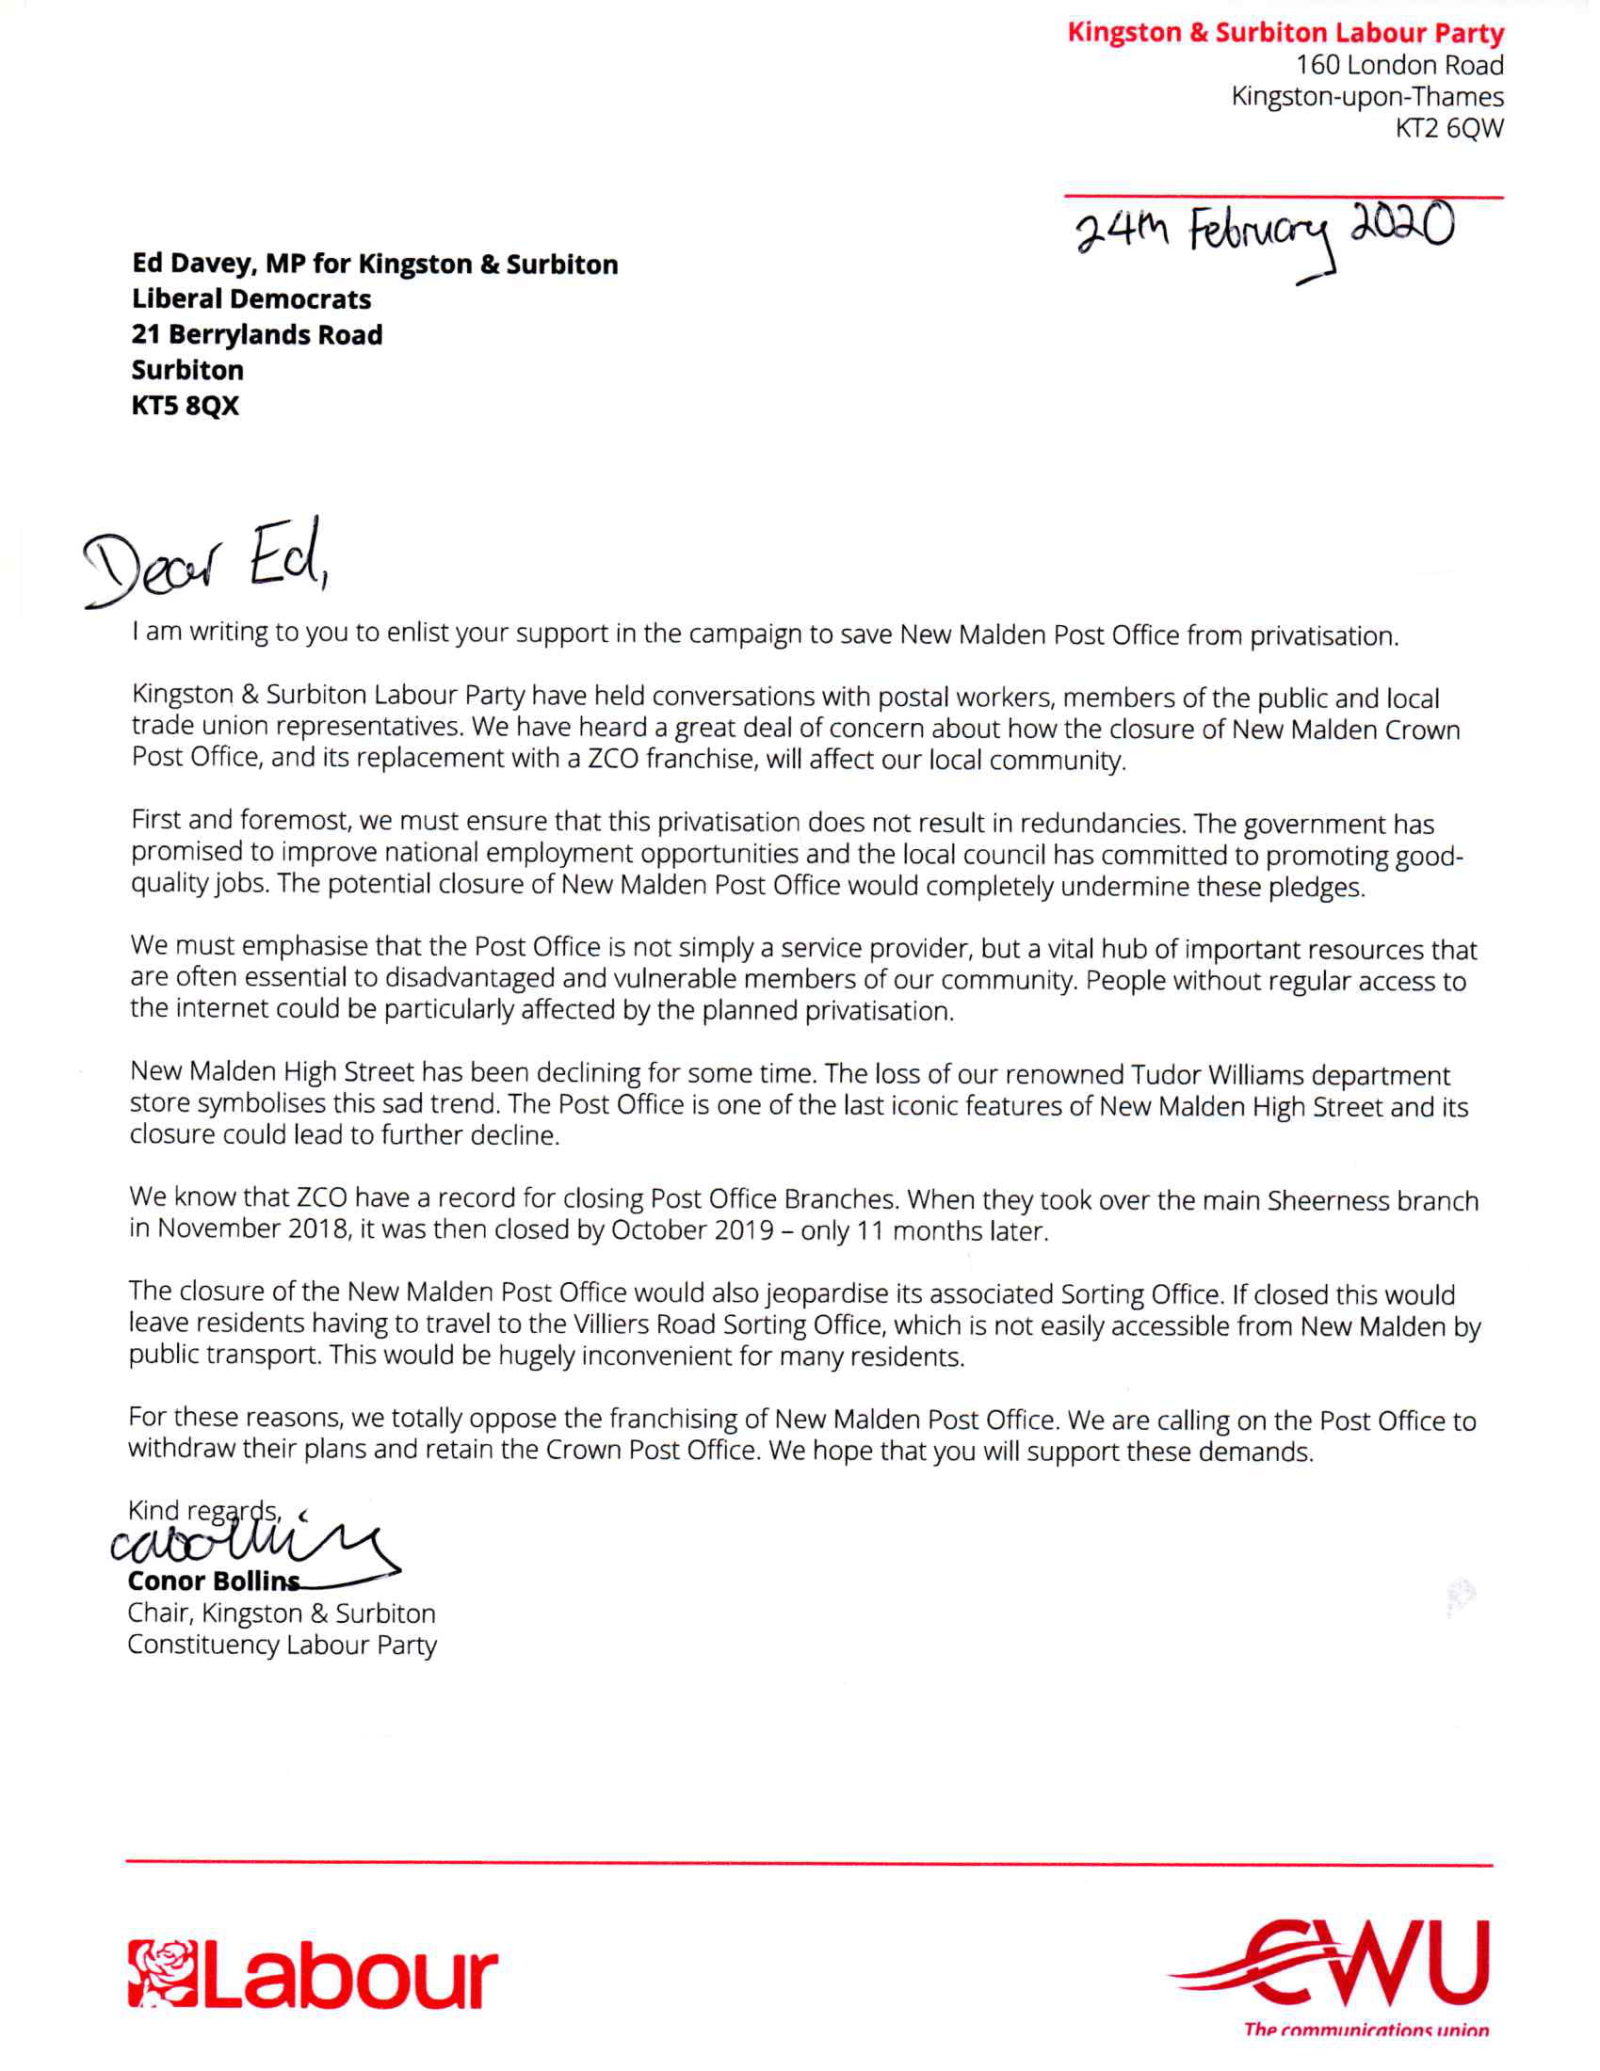 Letter to Ed Davey